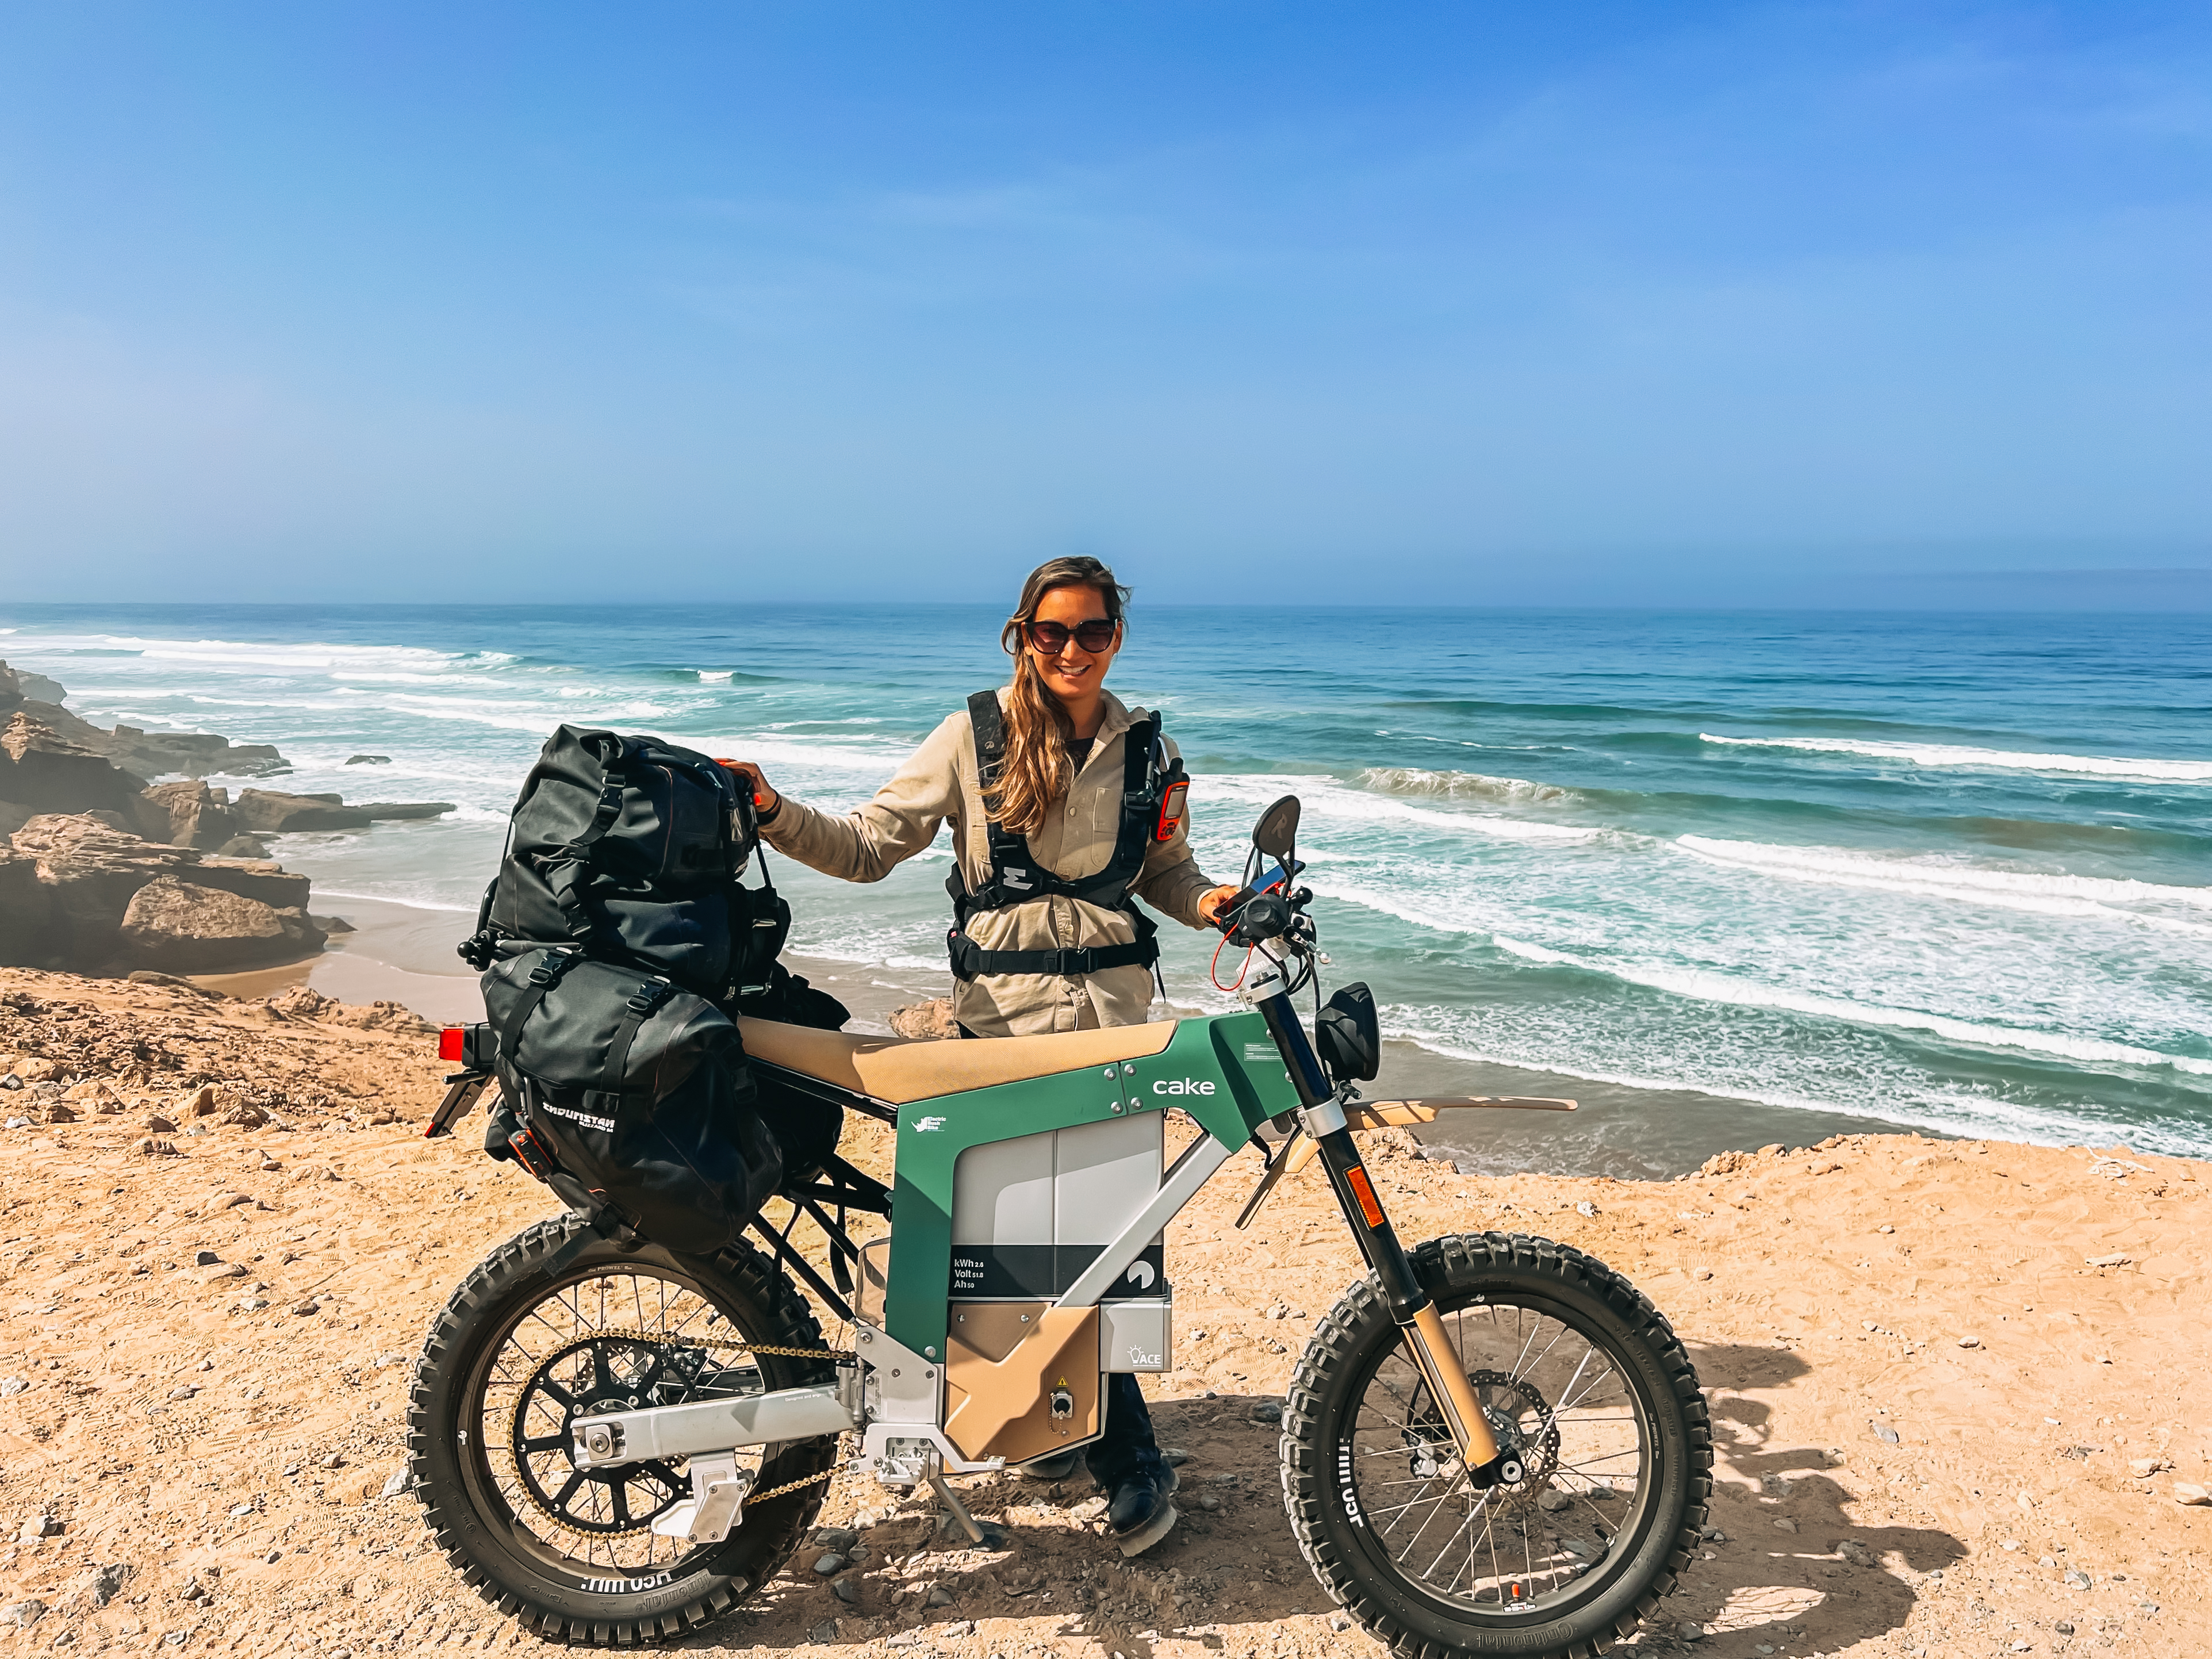 Sinje Gottwald with her electric motorcycle in Morocco. Image: Sinje Gottwald / Cake